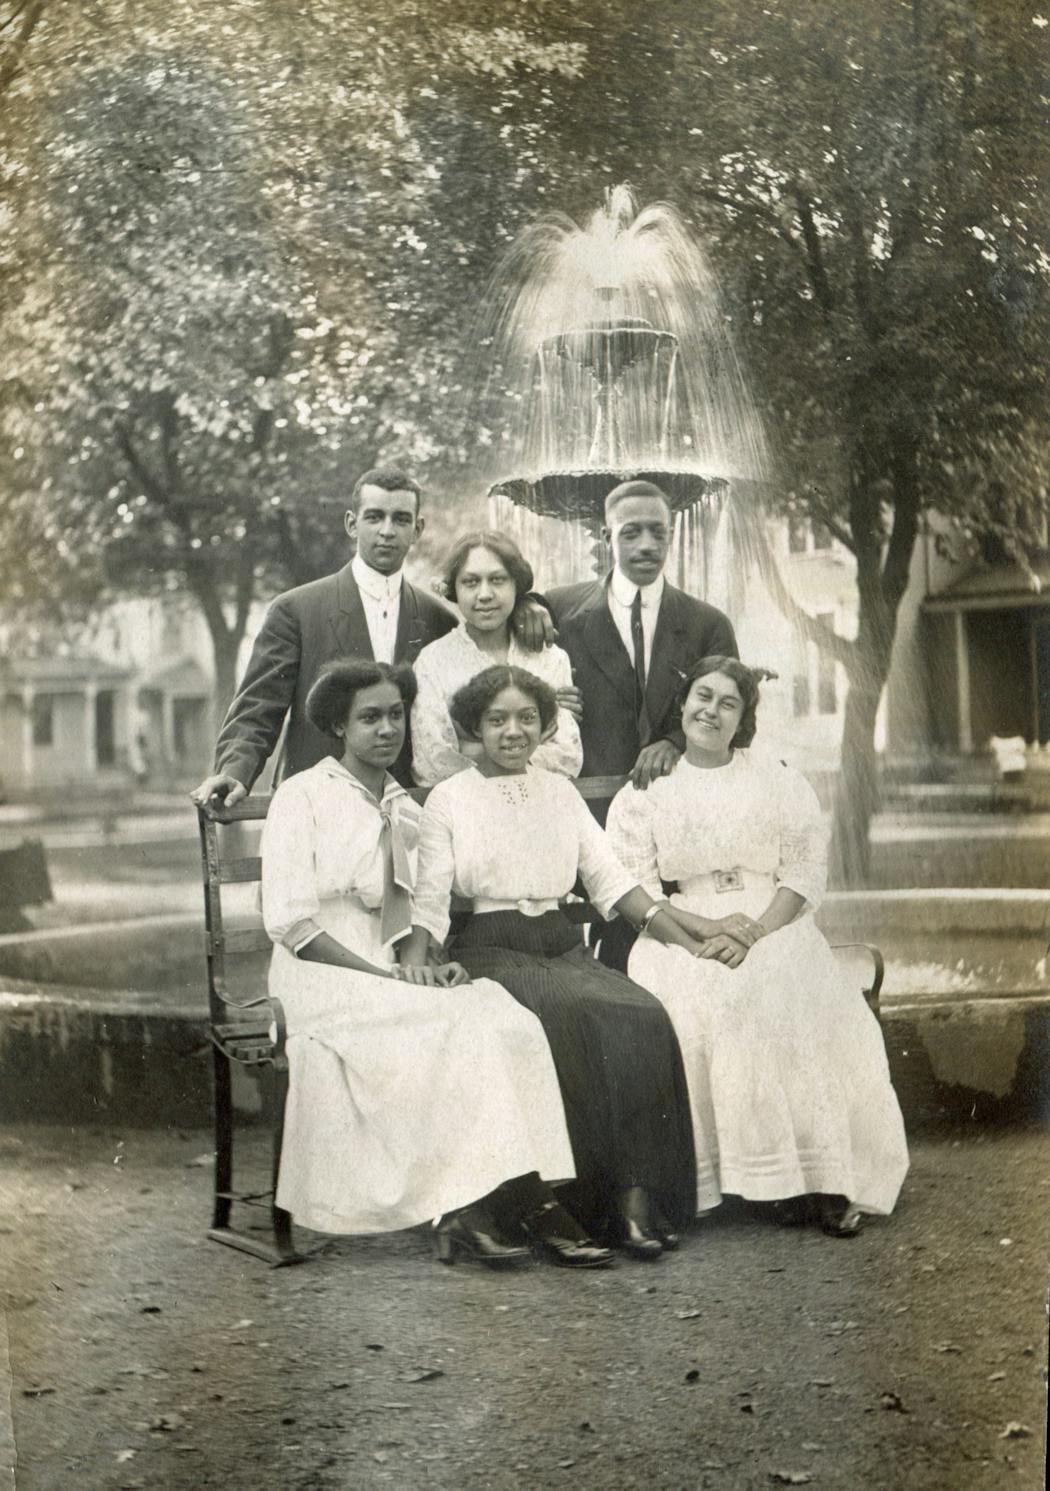 The Murphys, one of St. Paul’s Black pioneer families, posed for a portrait in Irvine Park.